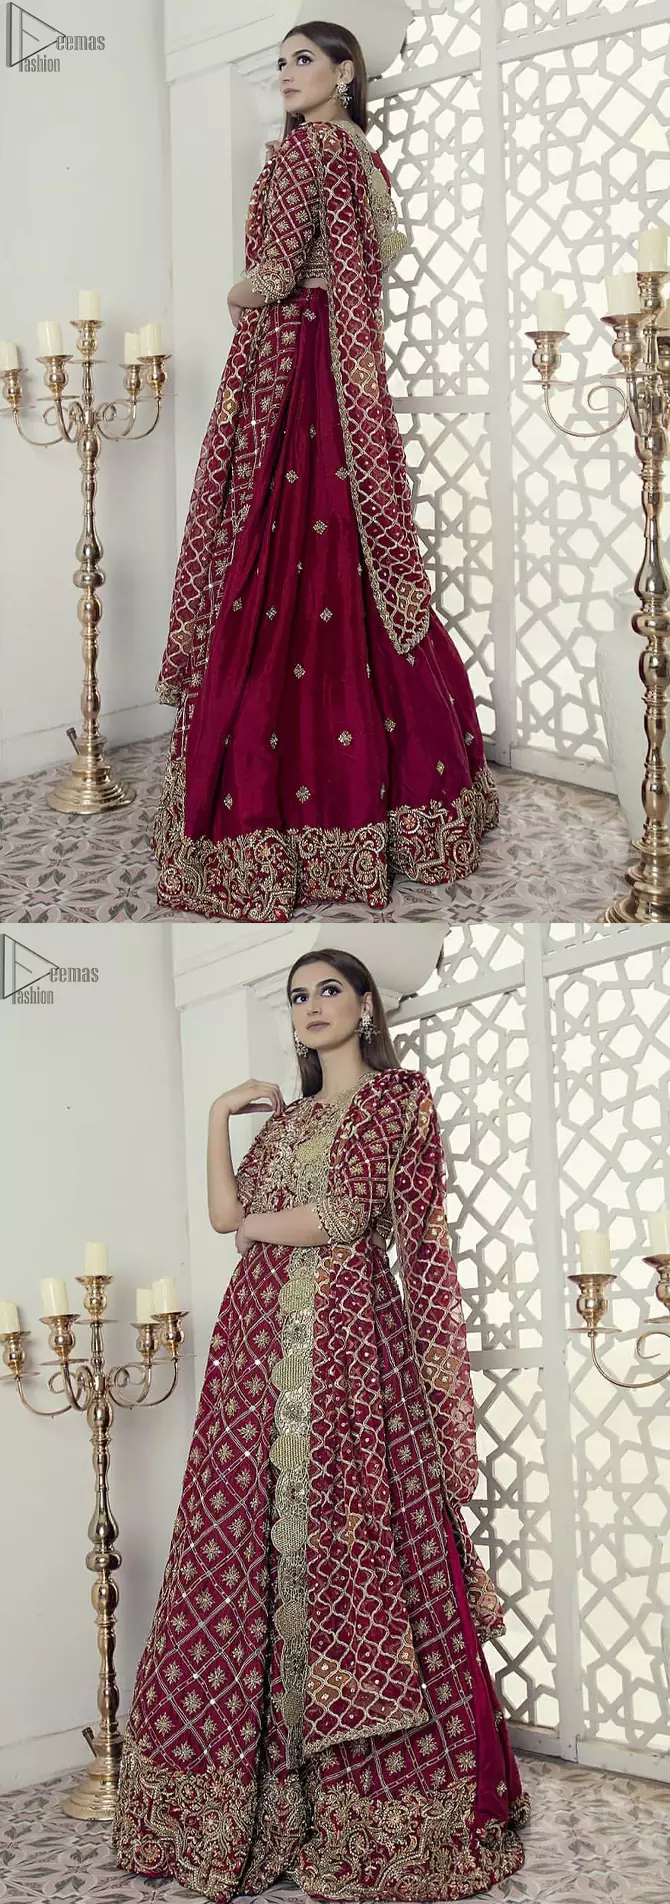 Maroon fully embroidered blouse cross-check lehenga n dupatta. This outfit is Crafted with love and classically designed to make your memorable day beautiful as it should be. This blouse comes with cross-check embroidery pattern lehenga. This lehenga dress is timeless and elegant with a touch of modern trend! 